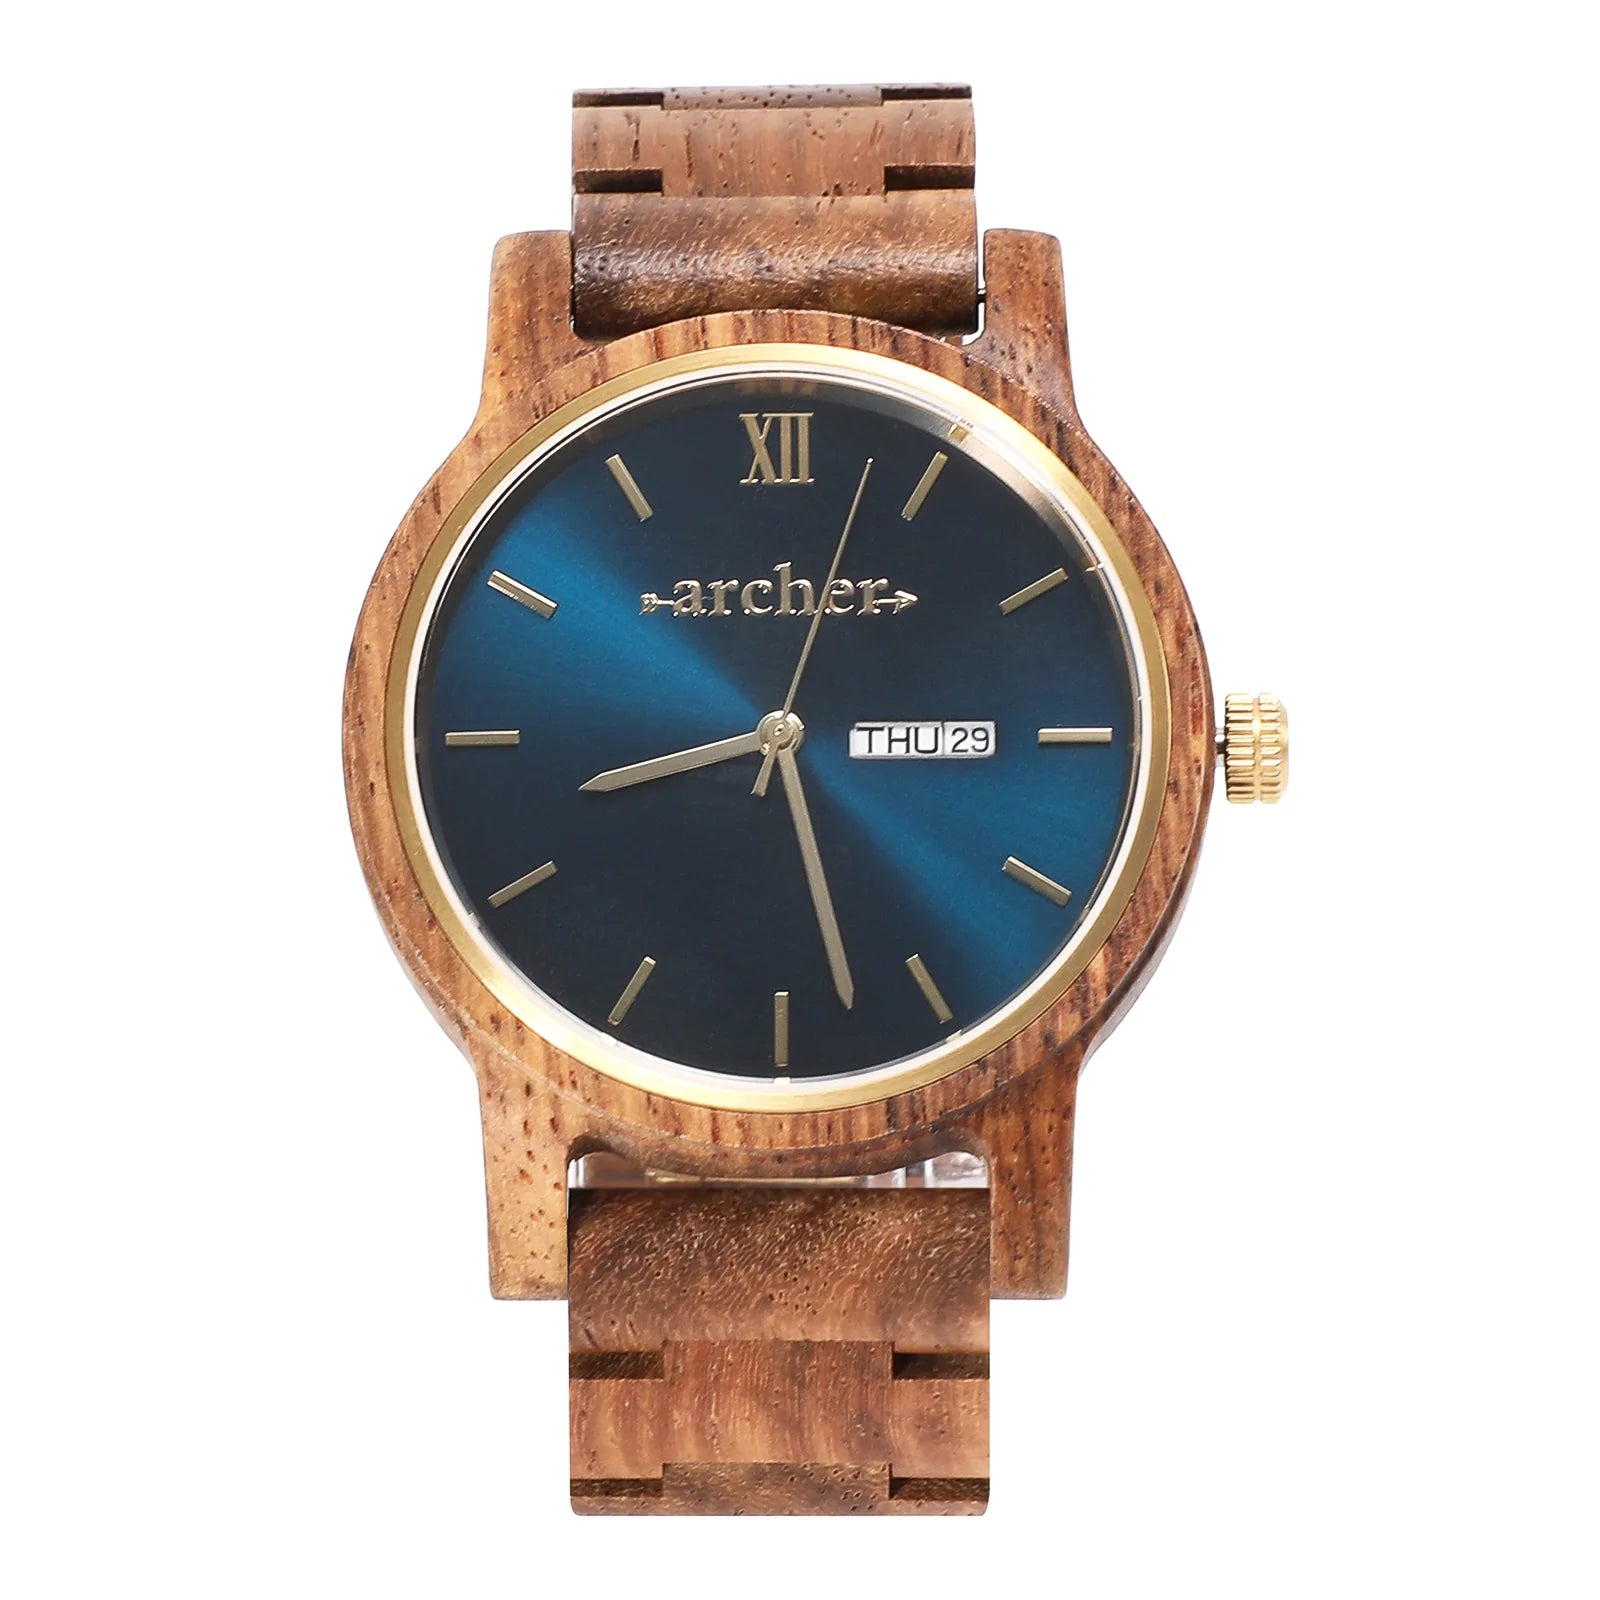 Set sail in the new Odyssey 42mm watch, featuring a stylish navy dial and timeless gold features, the Odyssey was made to inspire adventure.  Handcrafted with smooth Kosso wood and strong sapphire coated glass, the Odyssey will become your new favourite accessory, impressive and built to last. 